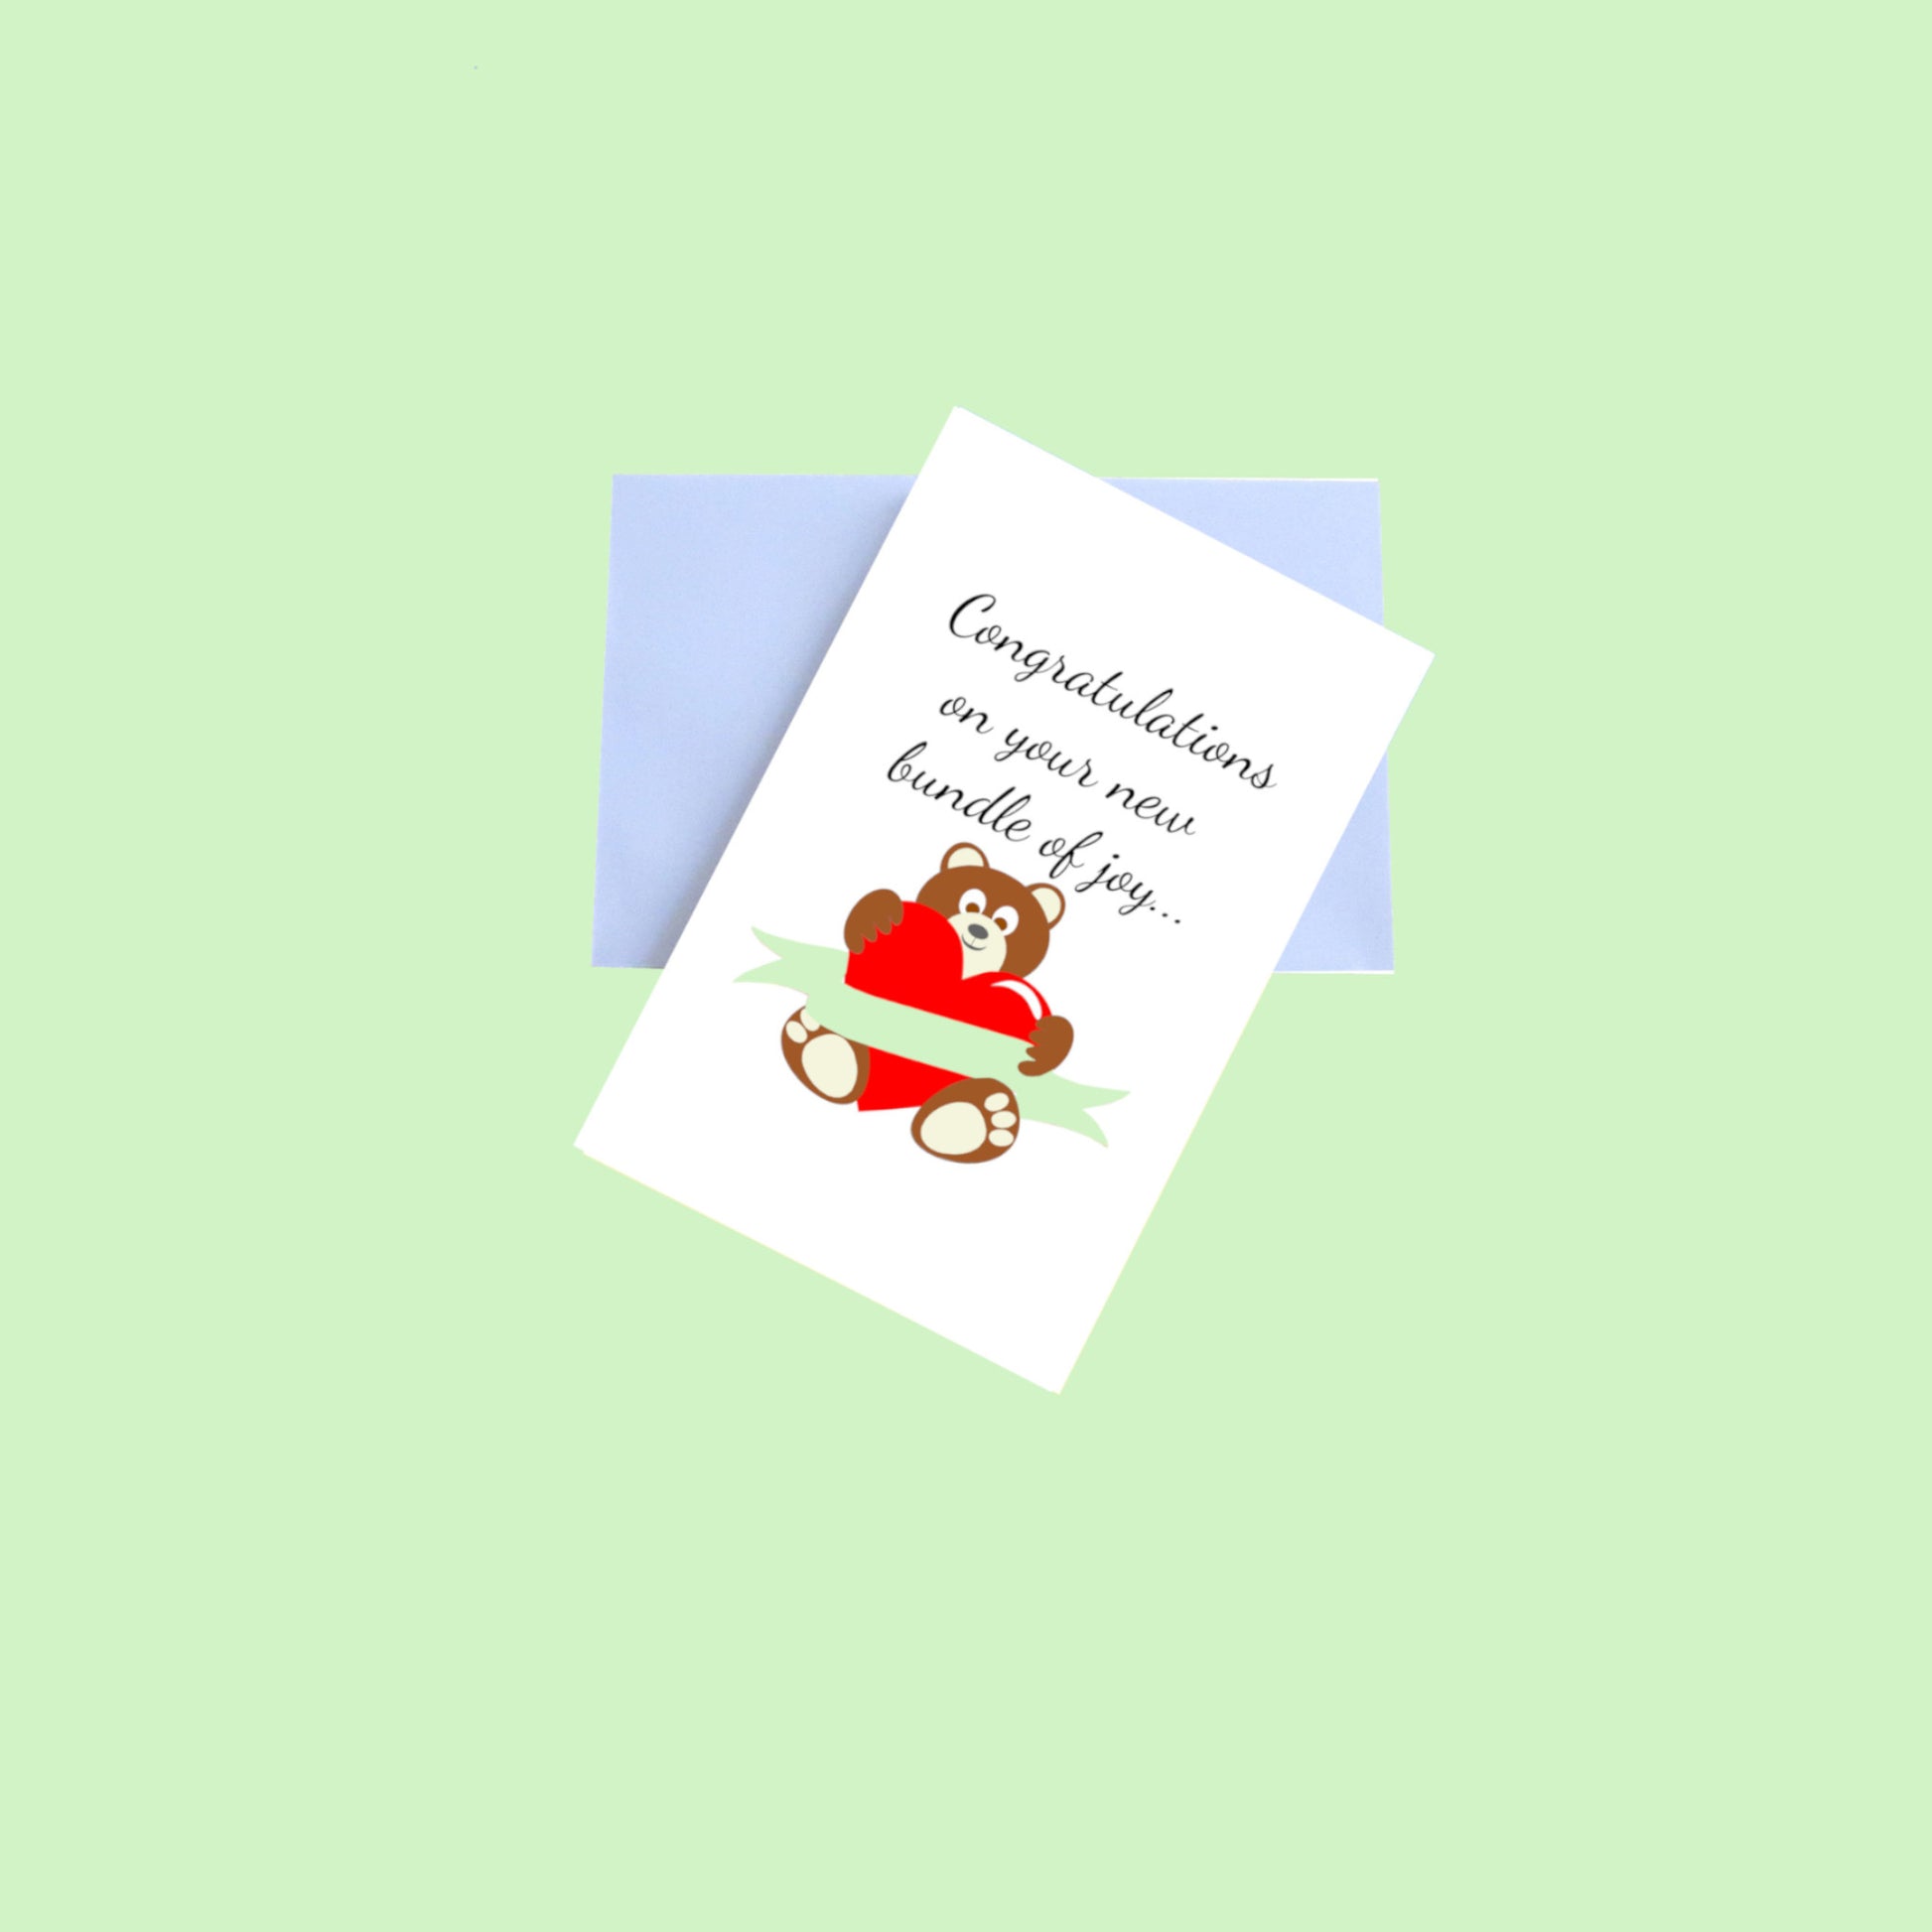 Congratulations on new 5.5x8.5 Greeting Card and Envelope - Green